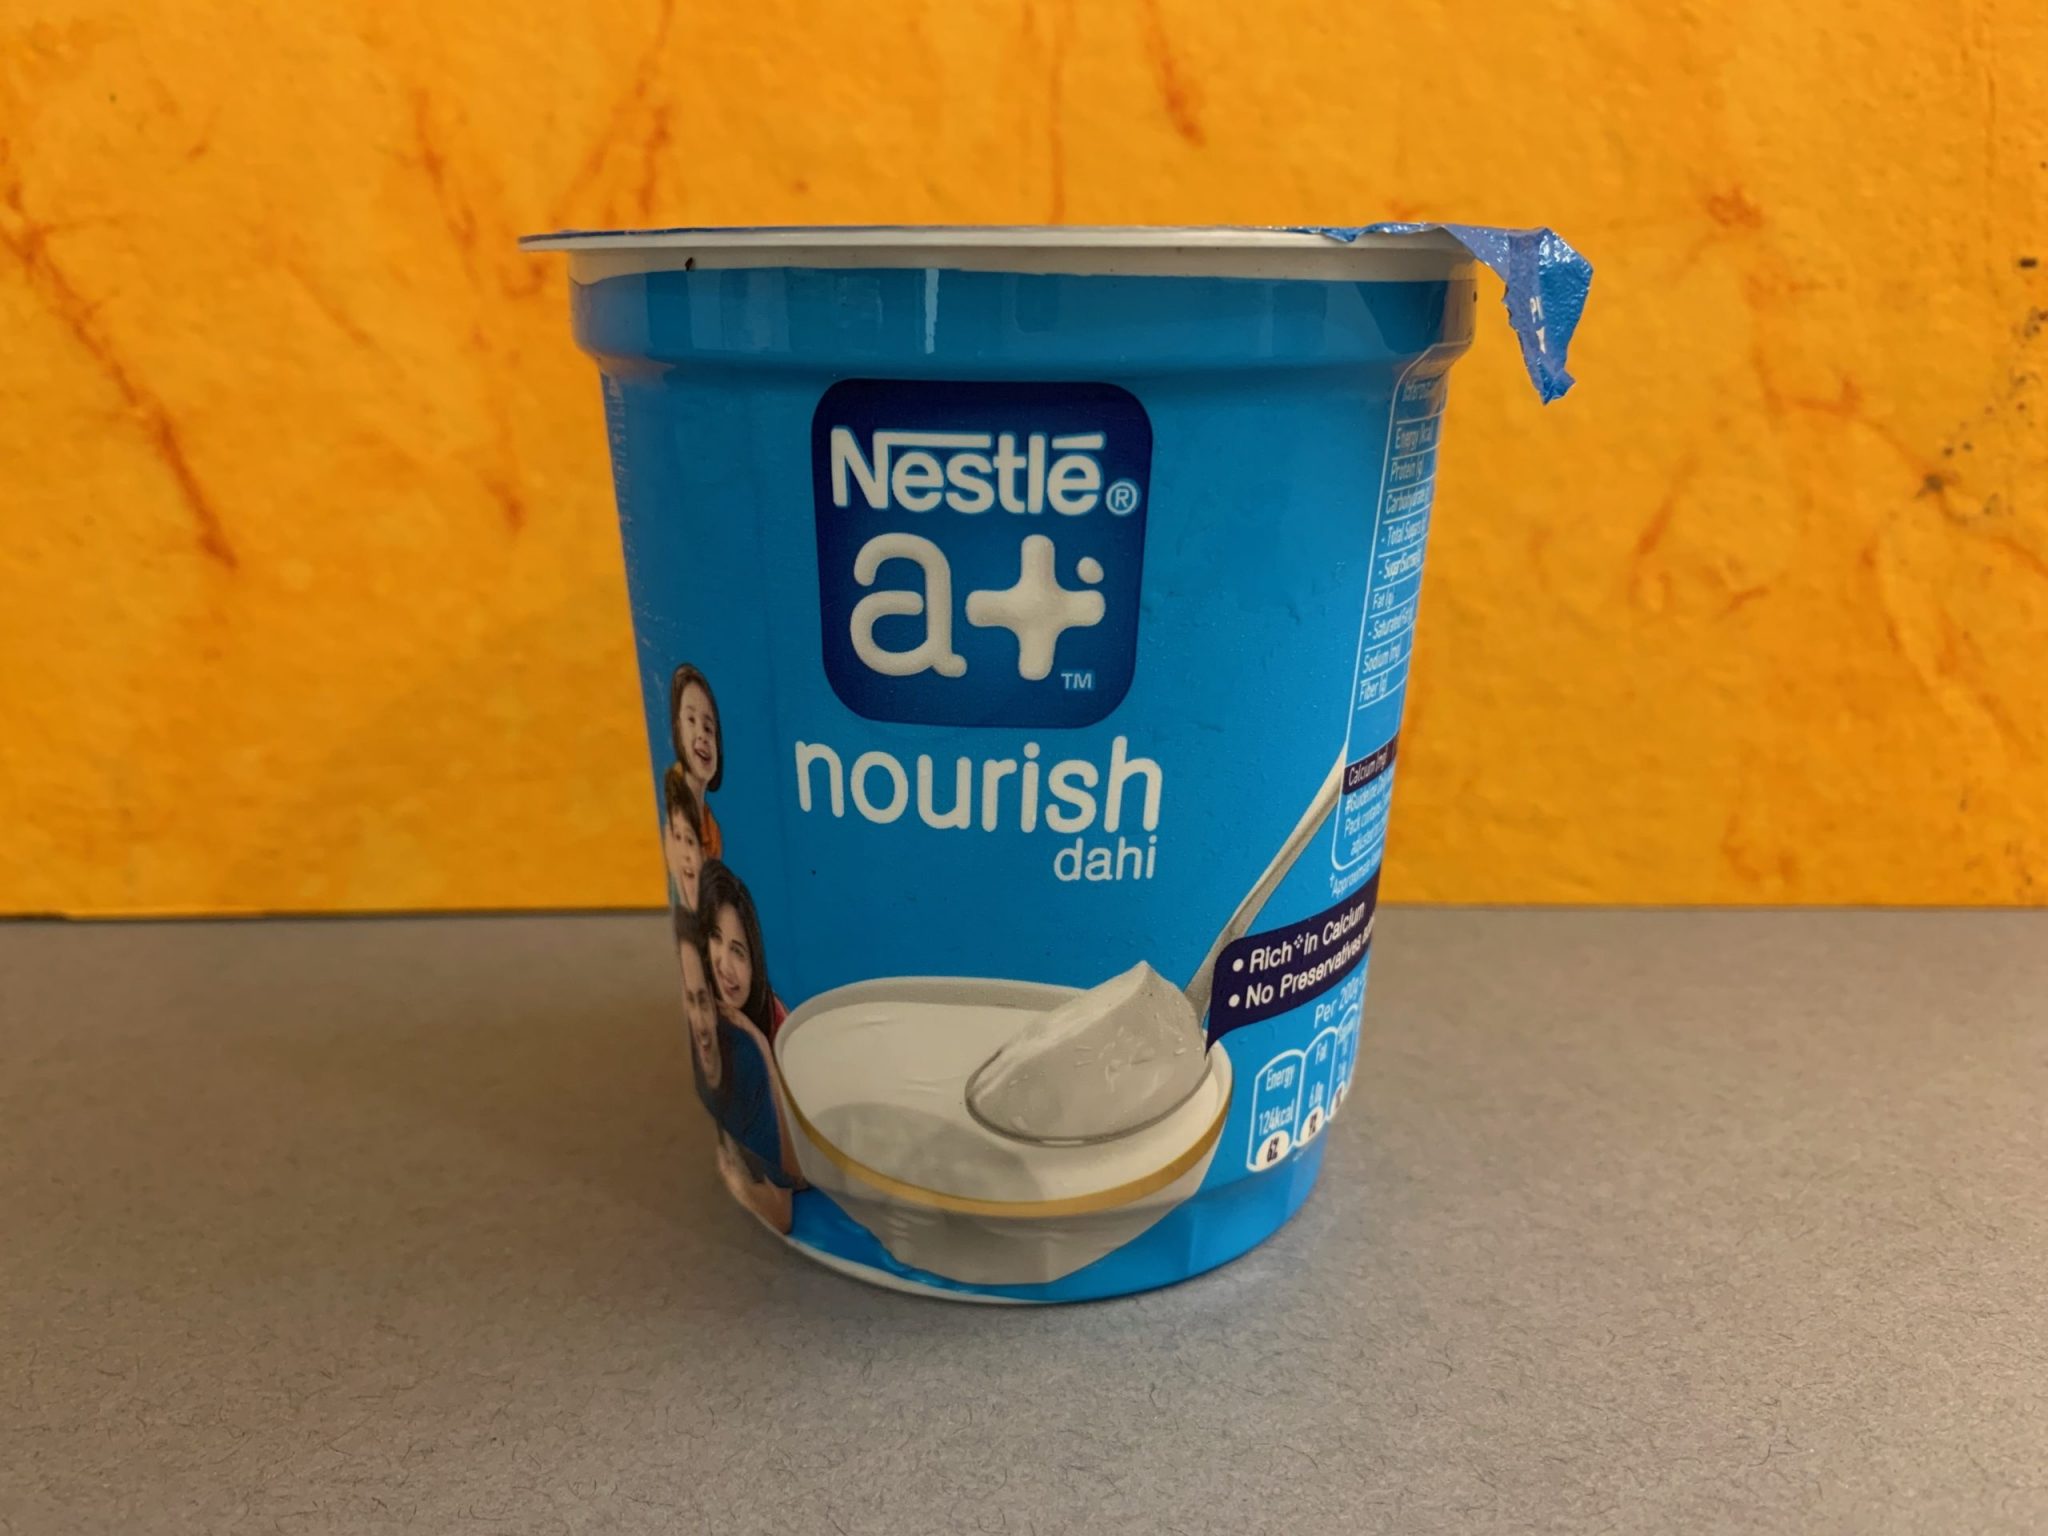 Nestle a+ Nourish Dahi: Packaging, Price And Flavor Details